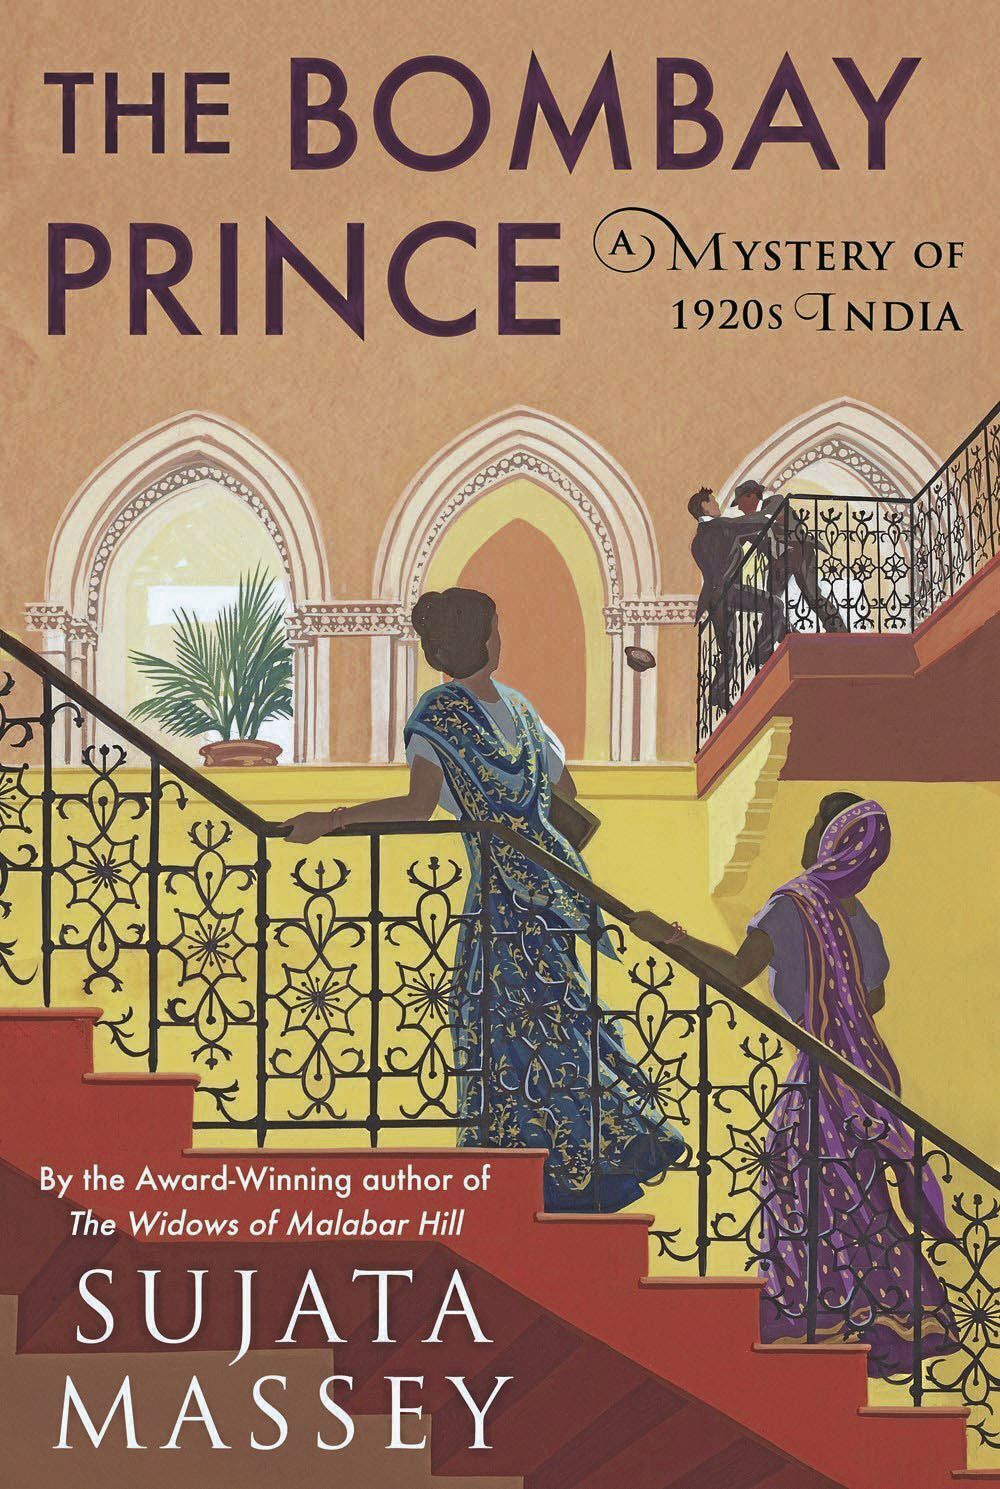 The Bombay Prince by Sujata Massey